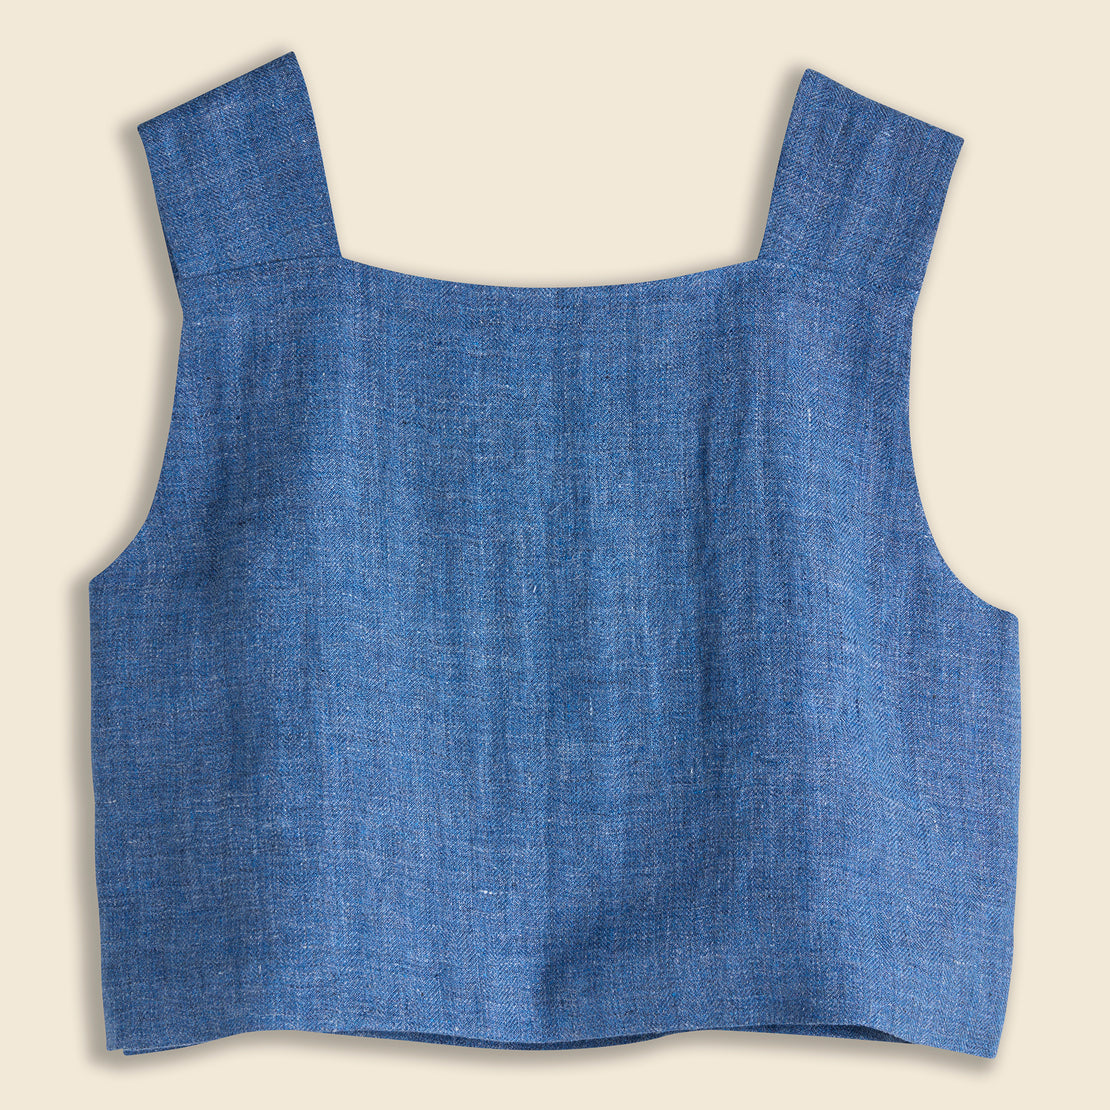 Boxed Crop Top - Denim Blue - Amente - STAG Provisions - W - Tops - Sleeveless